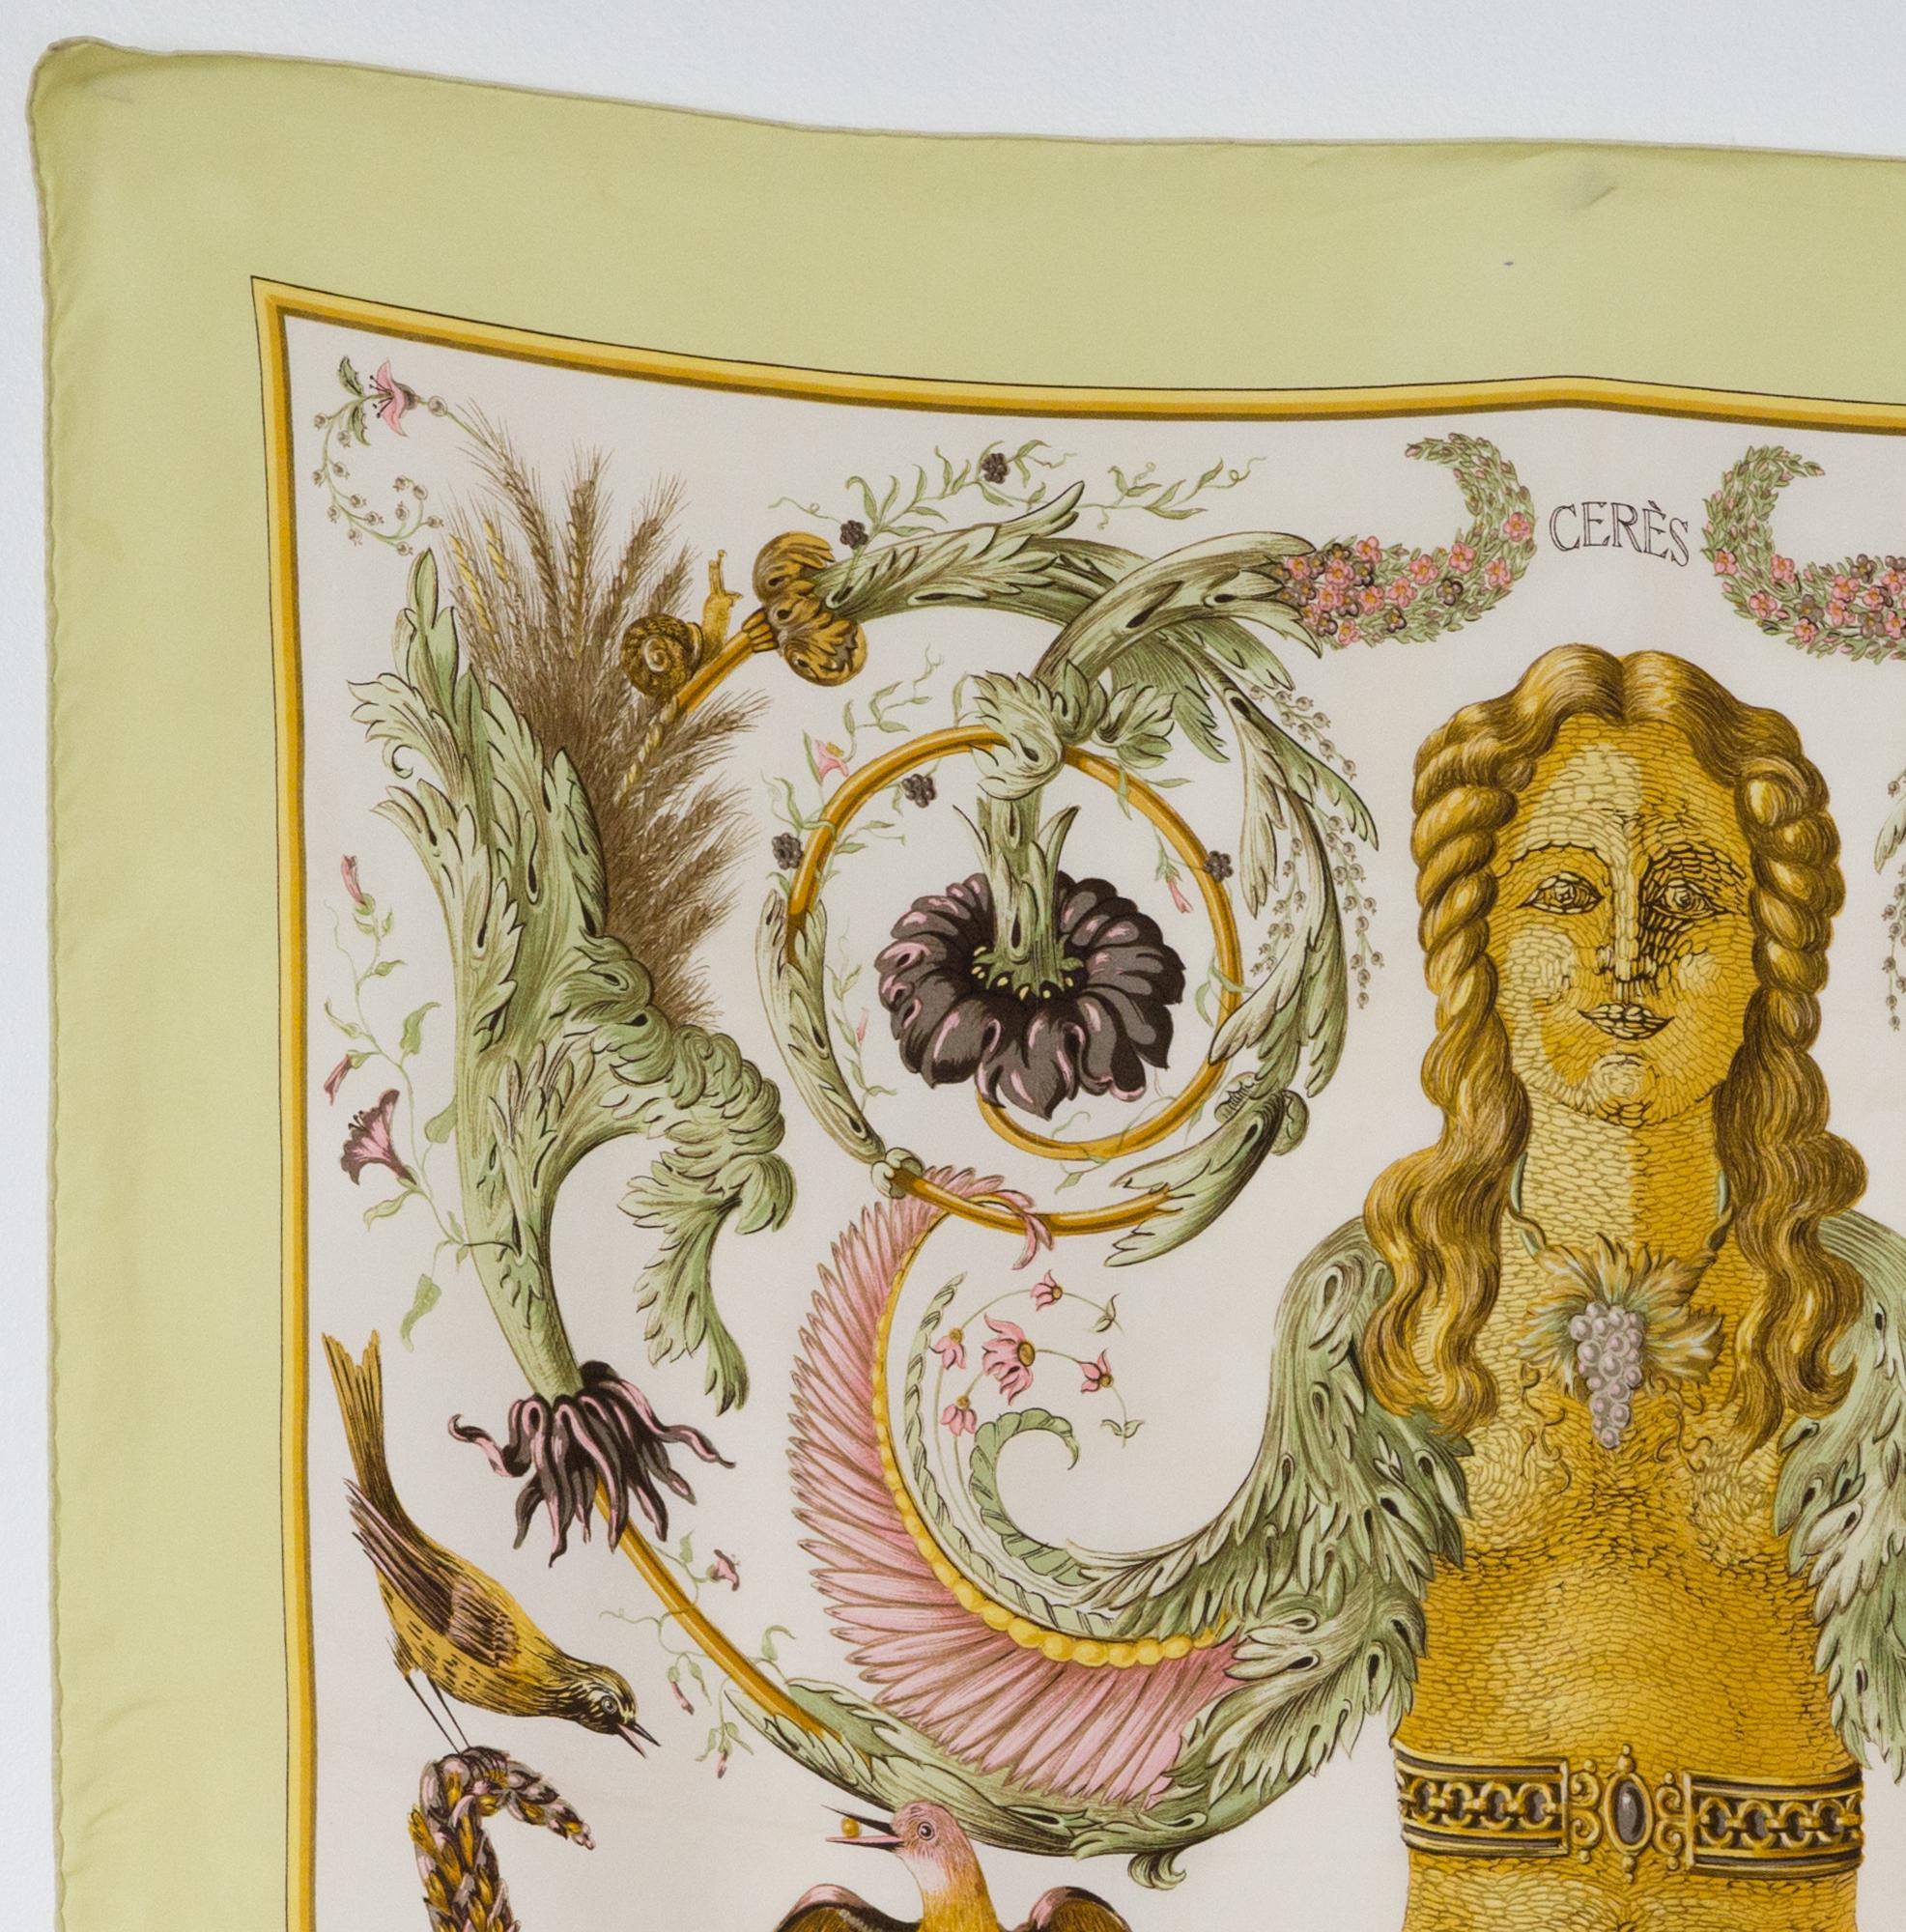 Hermes silk scarf Ceres by Françoise Faconnet featuring a light green border. 
First edition in 1967
In good vintage condition. Made in France.
35,4in. (90cm)  X 35,4in. (90cm)
We guarantee you will receive this  iconic item as described and showed